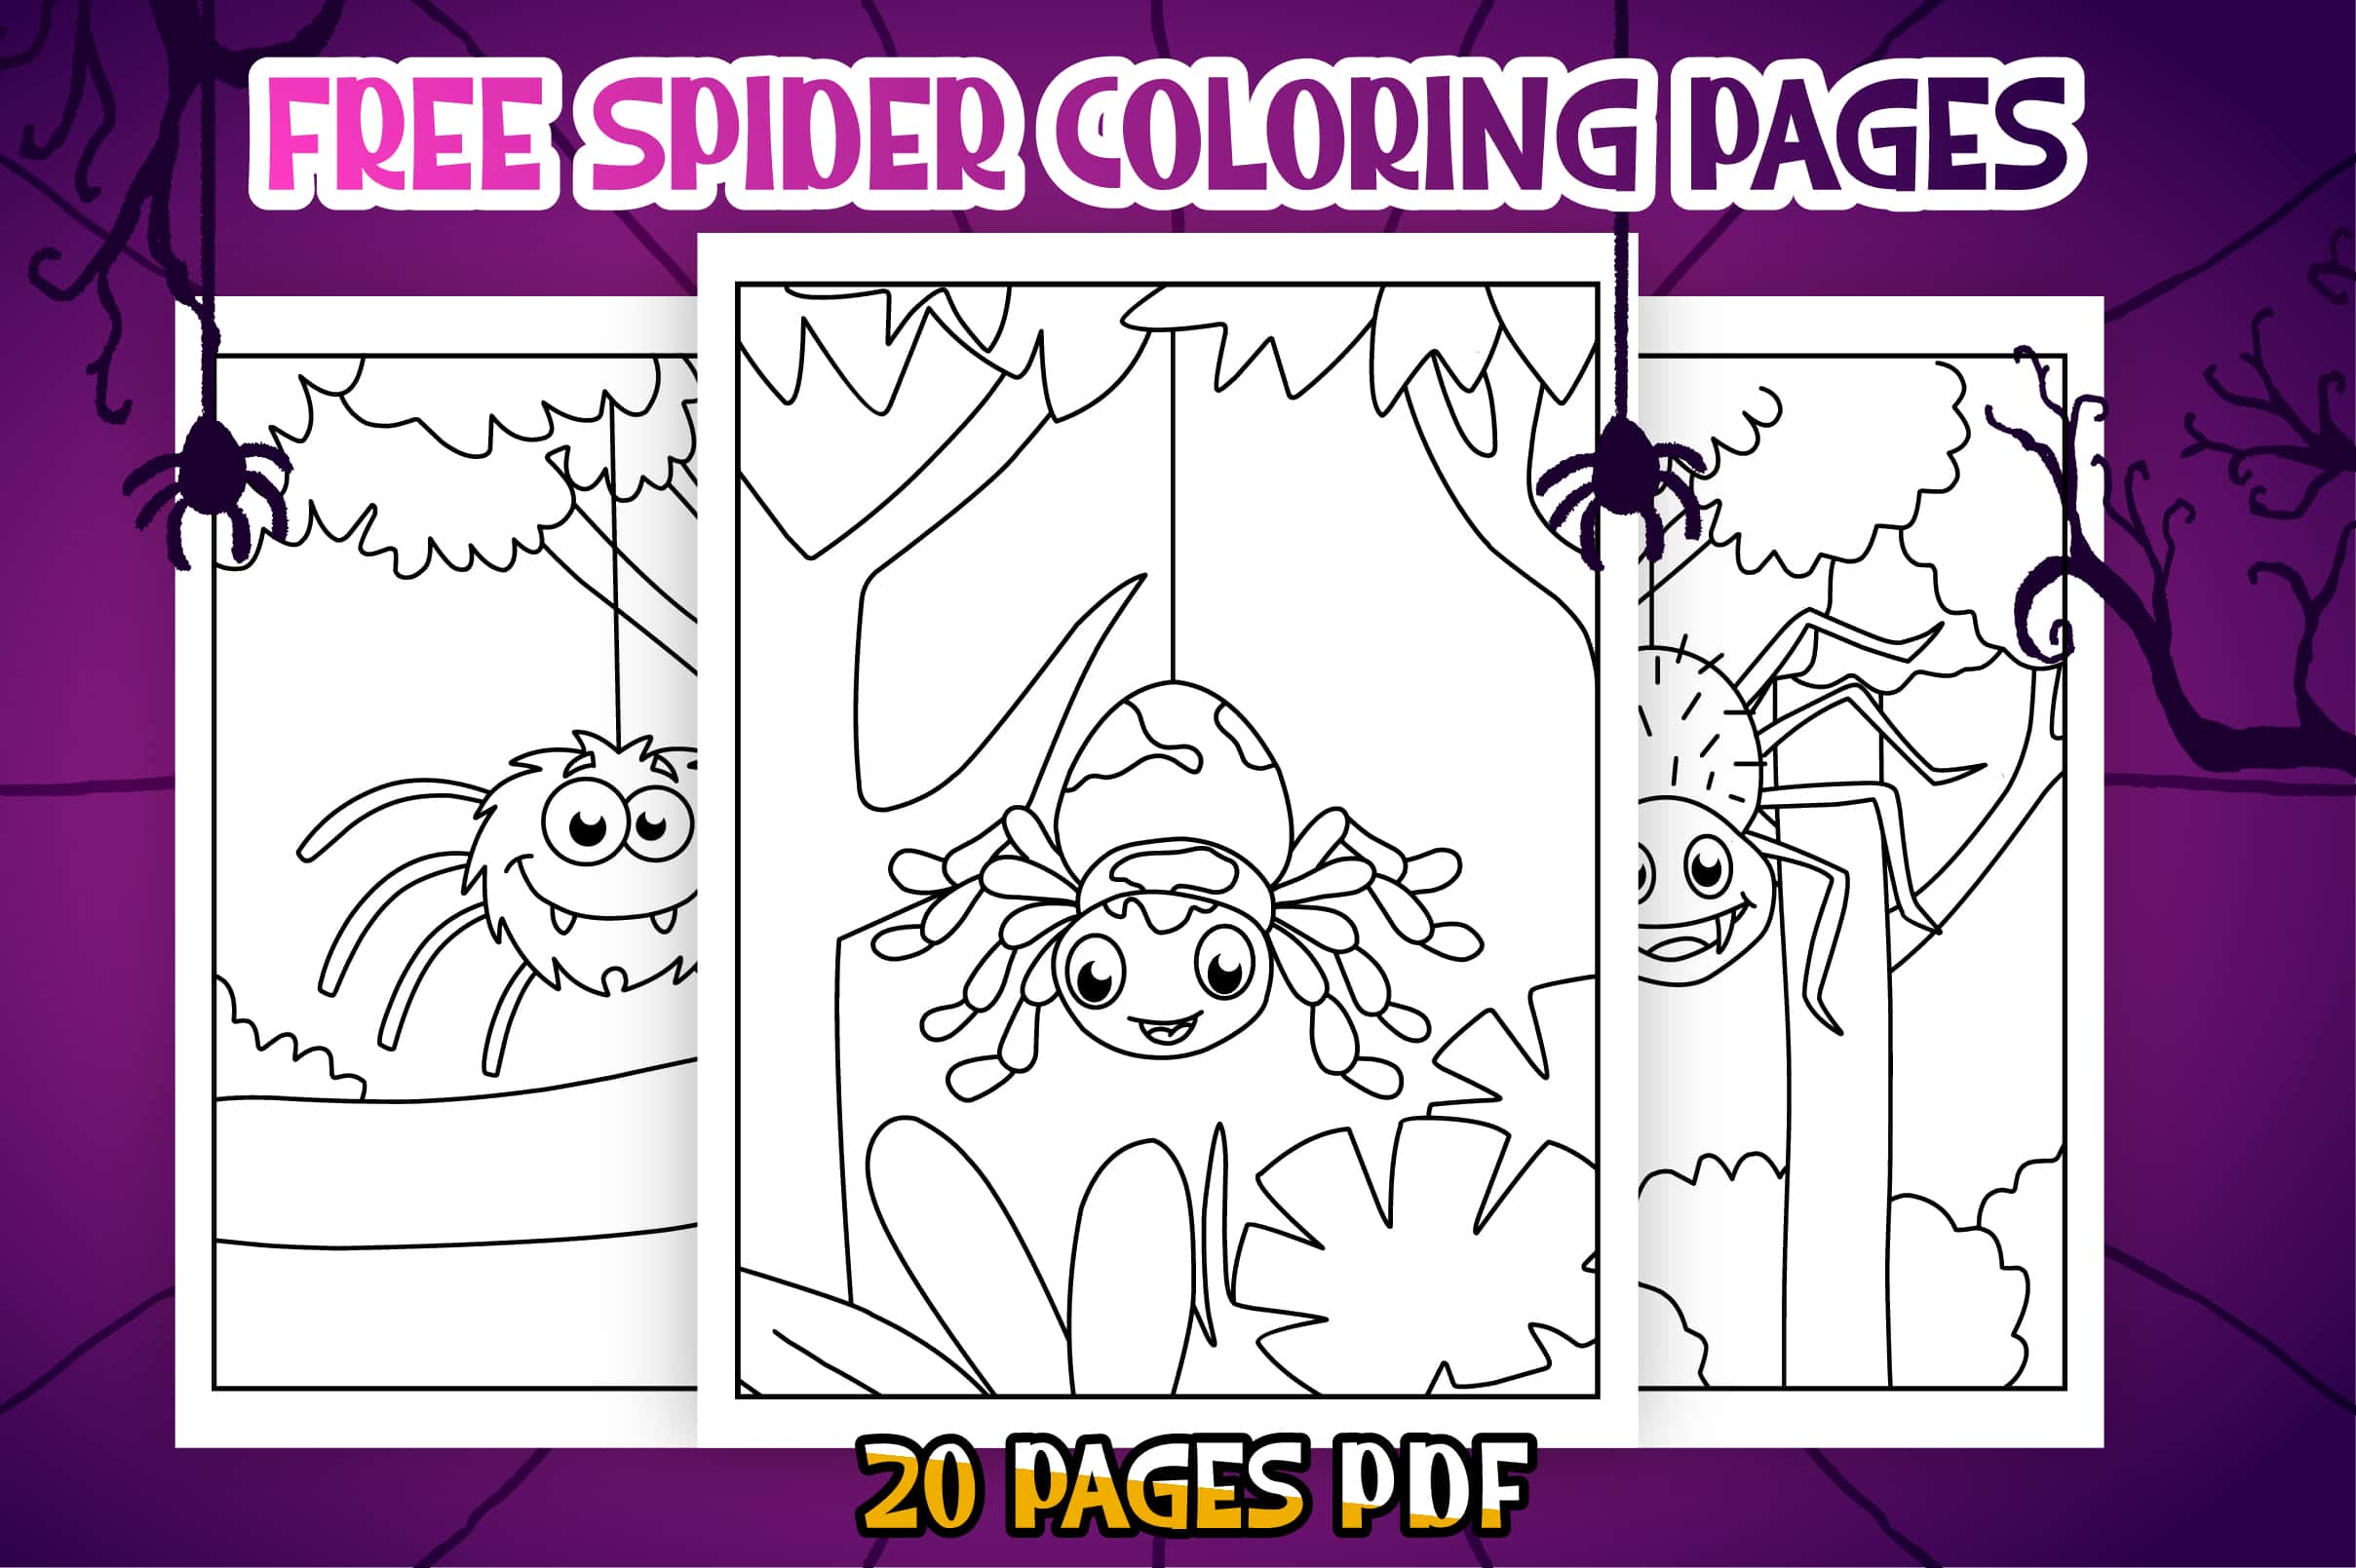 Free Spider Coloring Pages For Kids - Printable Coloring Pages Pdf